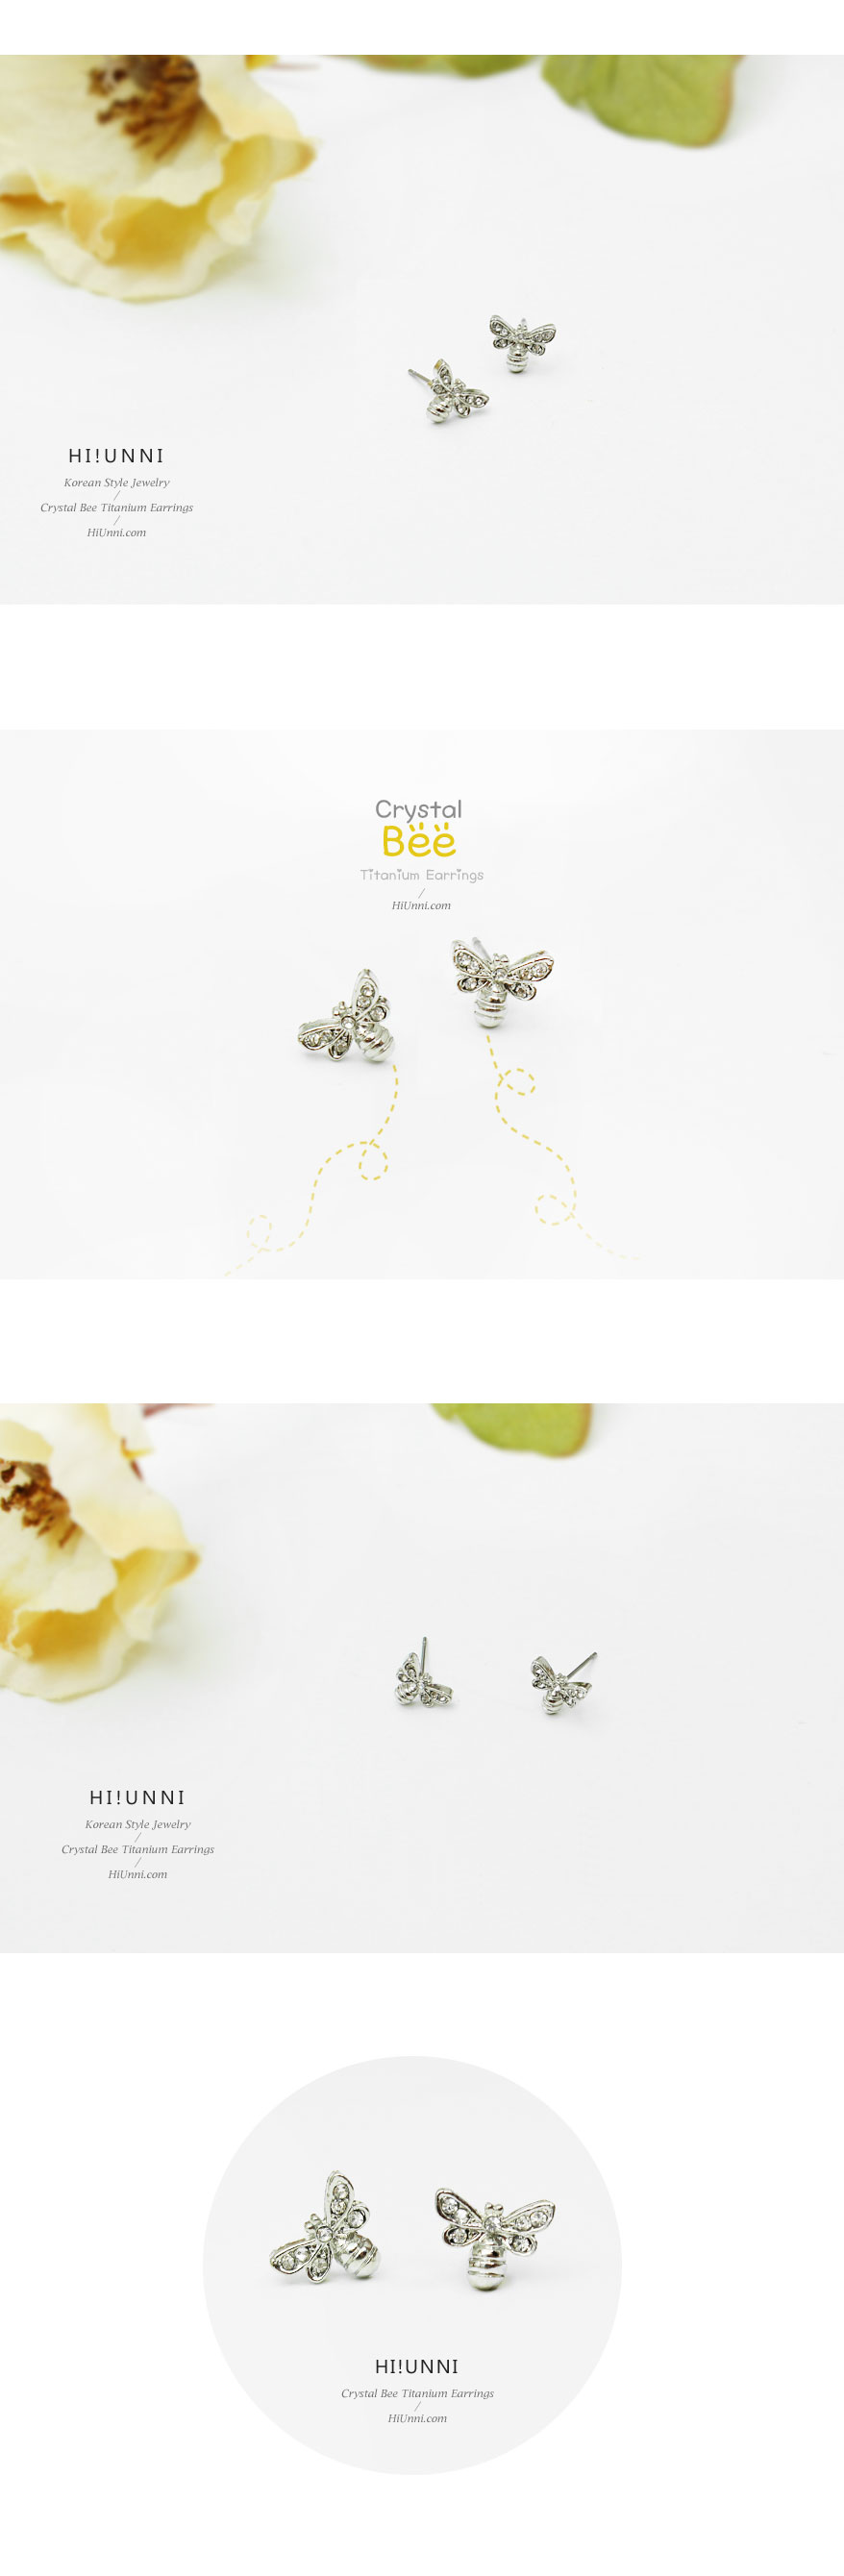 accessories_ear_stud_earrings_korean_asian_style_jewelry__titanium_nickel-free_crystal_bee_insect_3